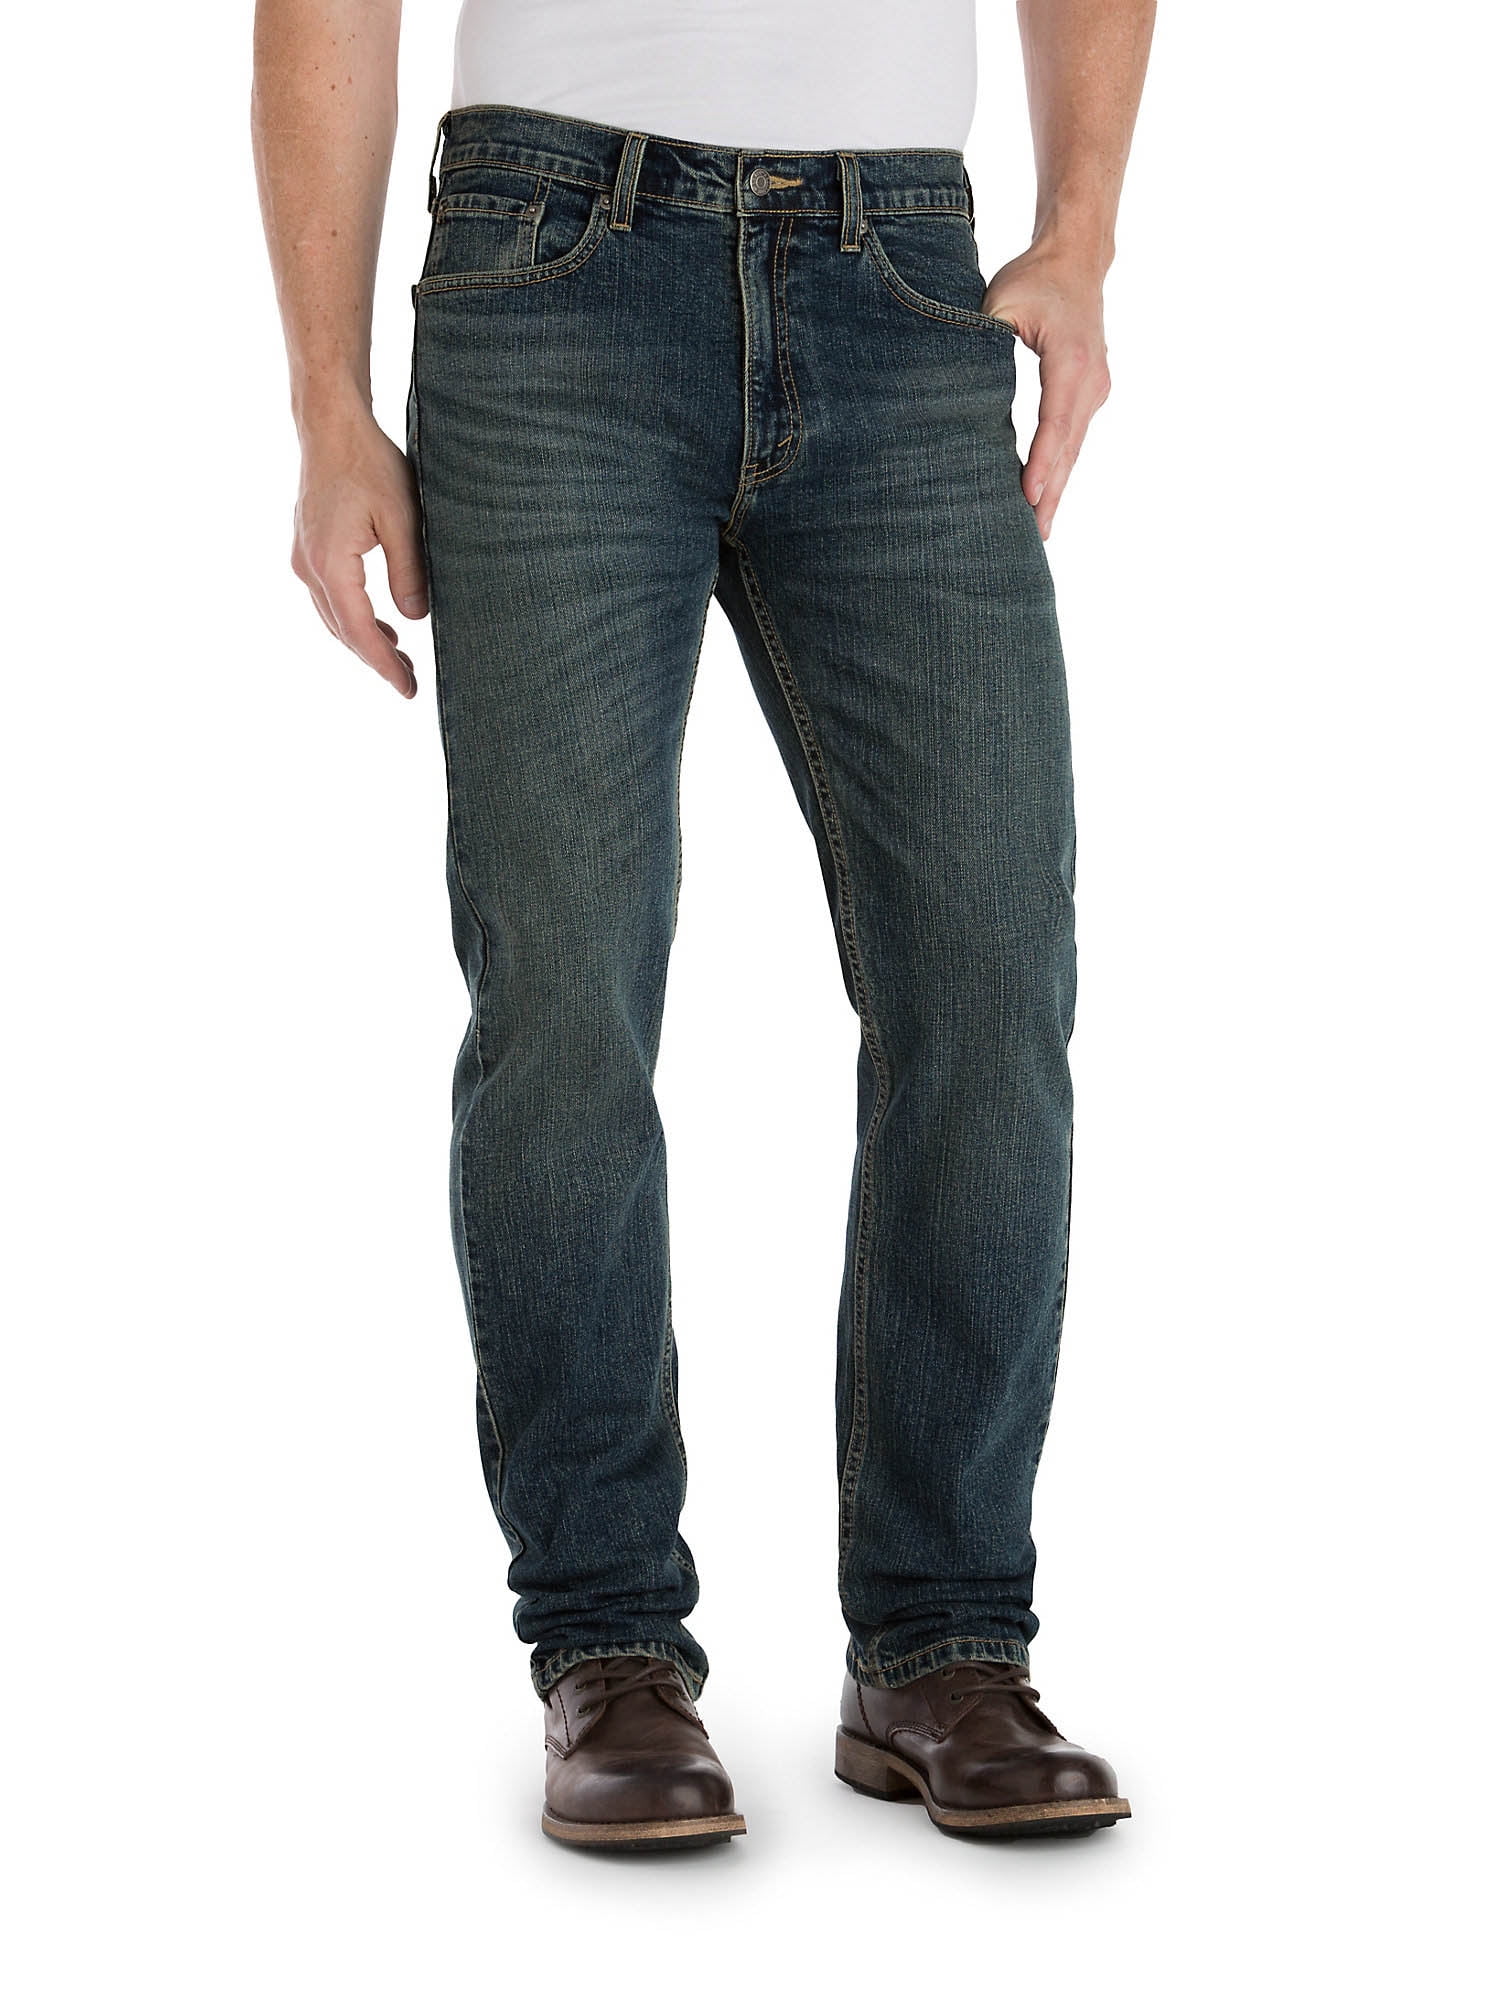 Signature by Levi Strauss & Co. Men's and Big Men's Regular Fit Jeans ...